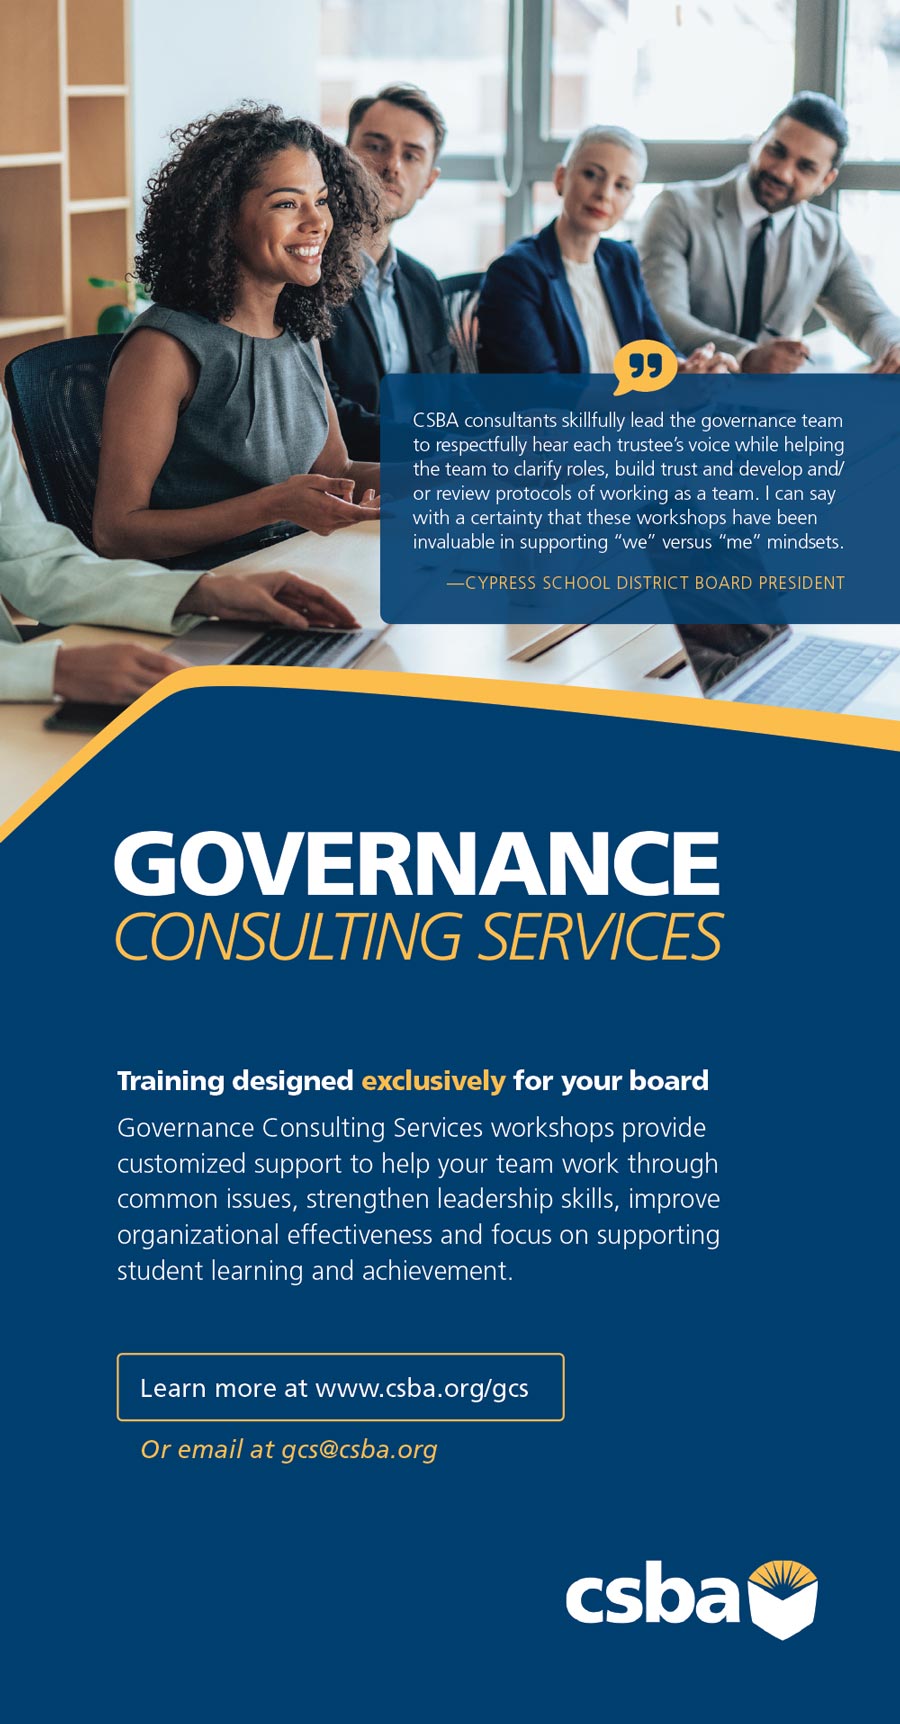 CSBA Governance Consulting Services Advertisement